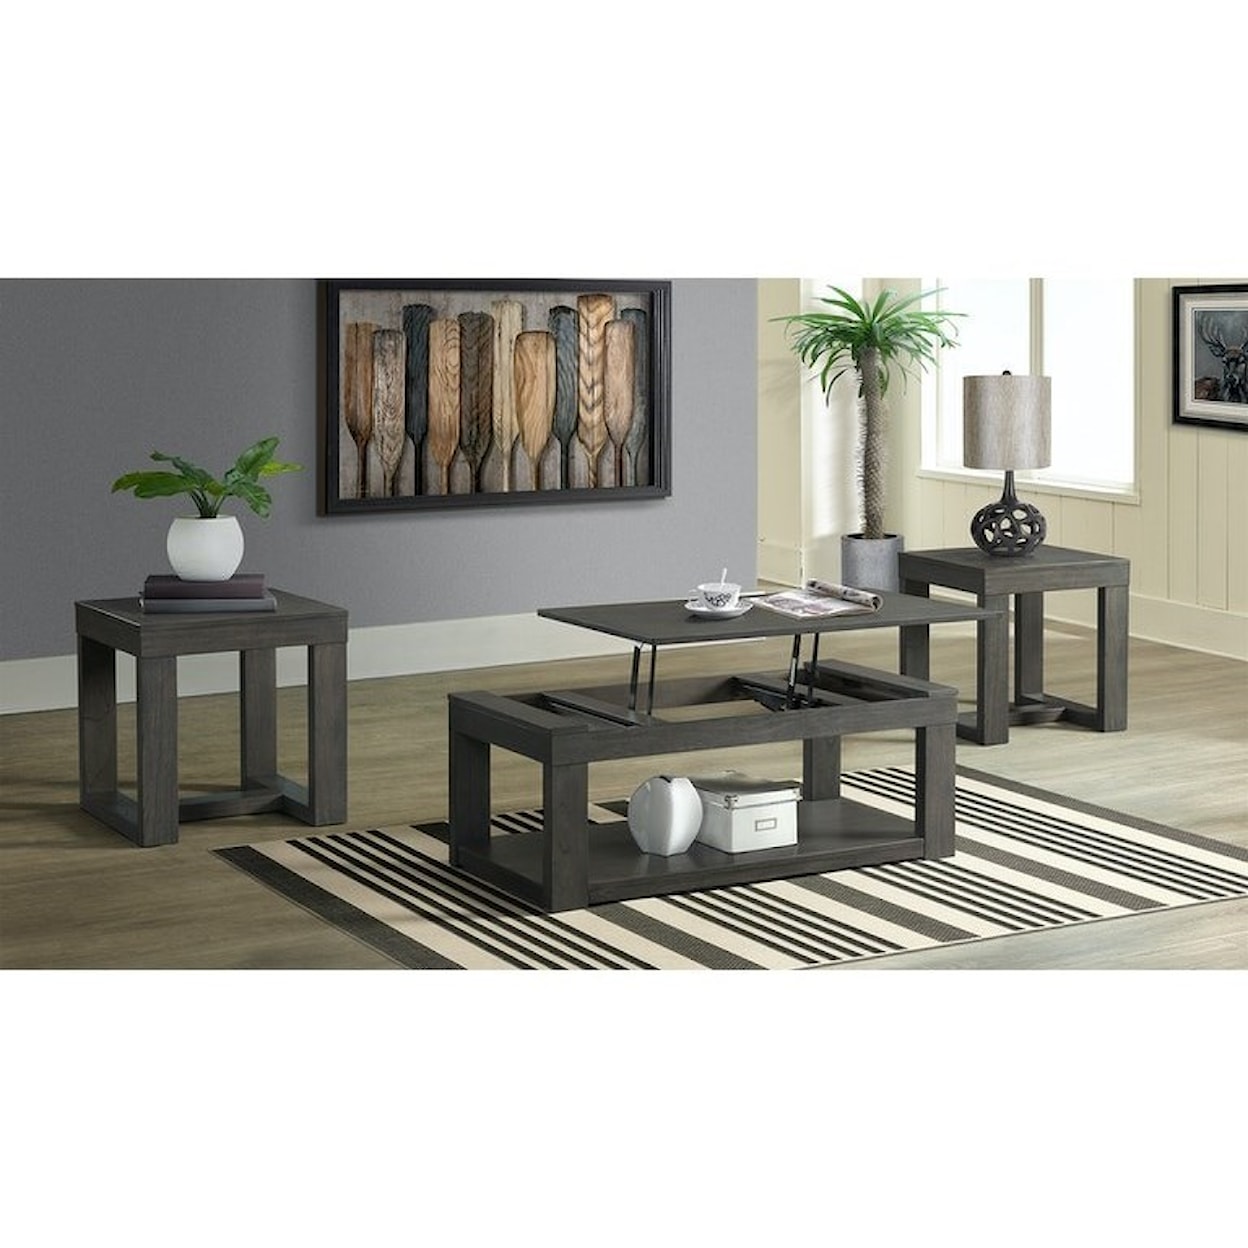 Elements Benton Occasional Table Group